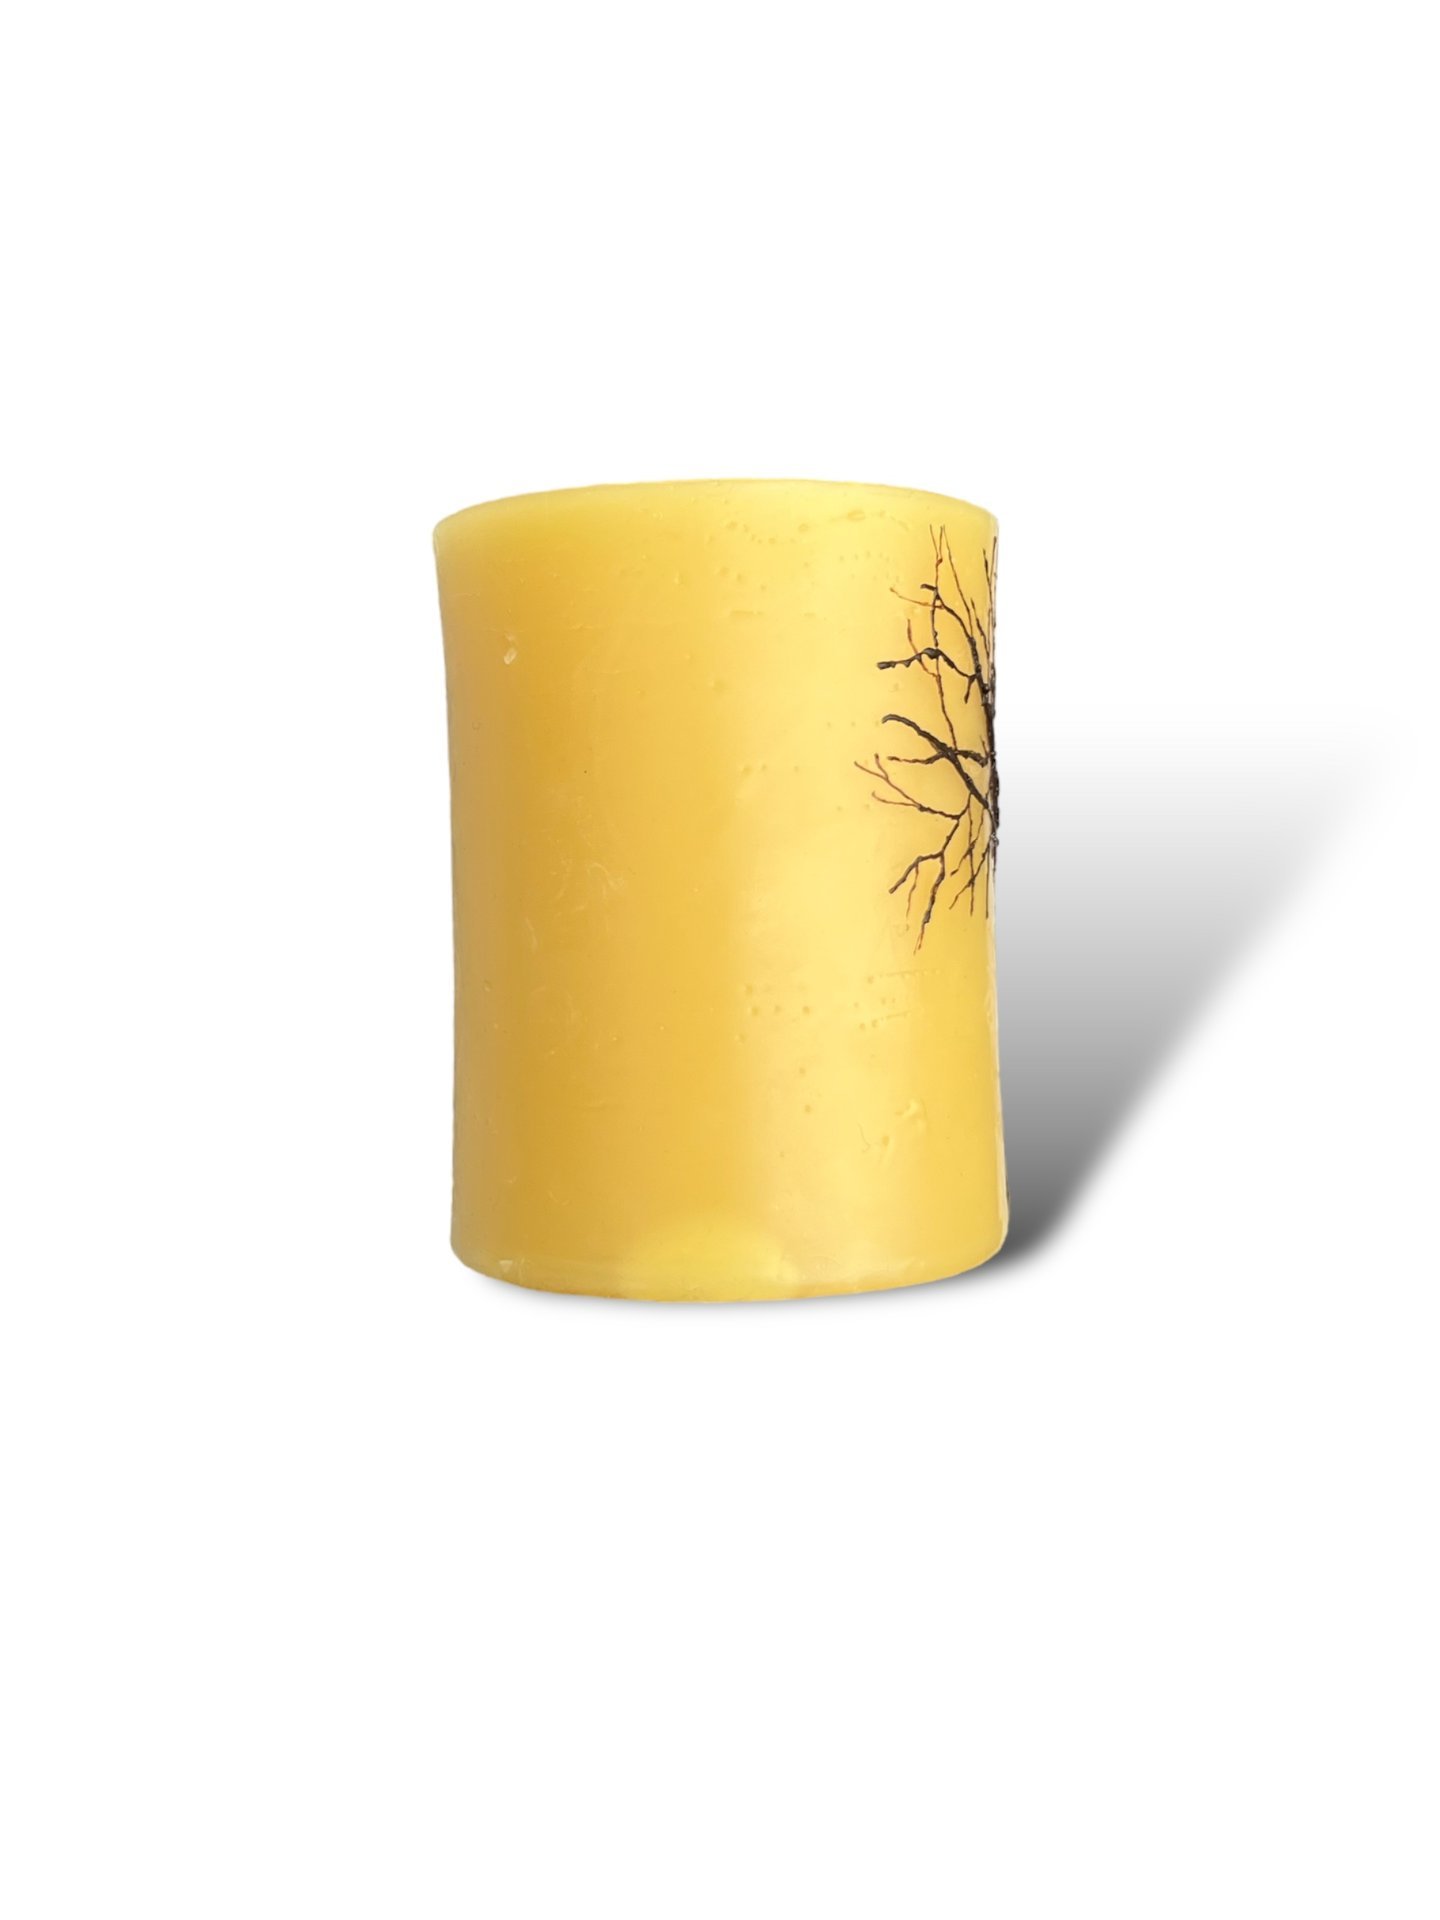 Beeswax Candle with a Brown Encaustic Tree